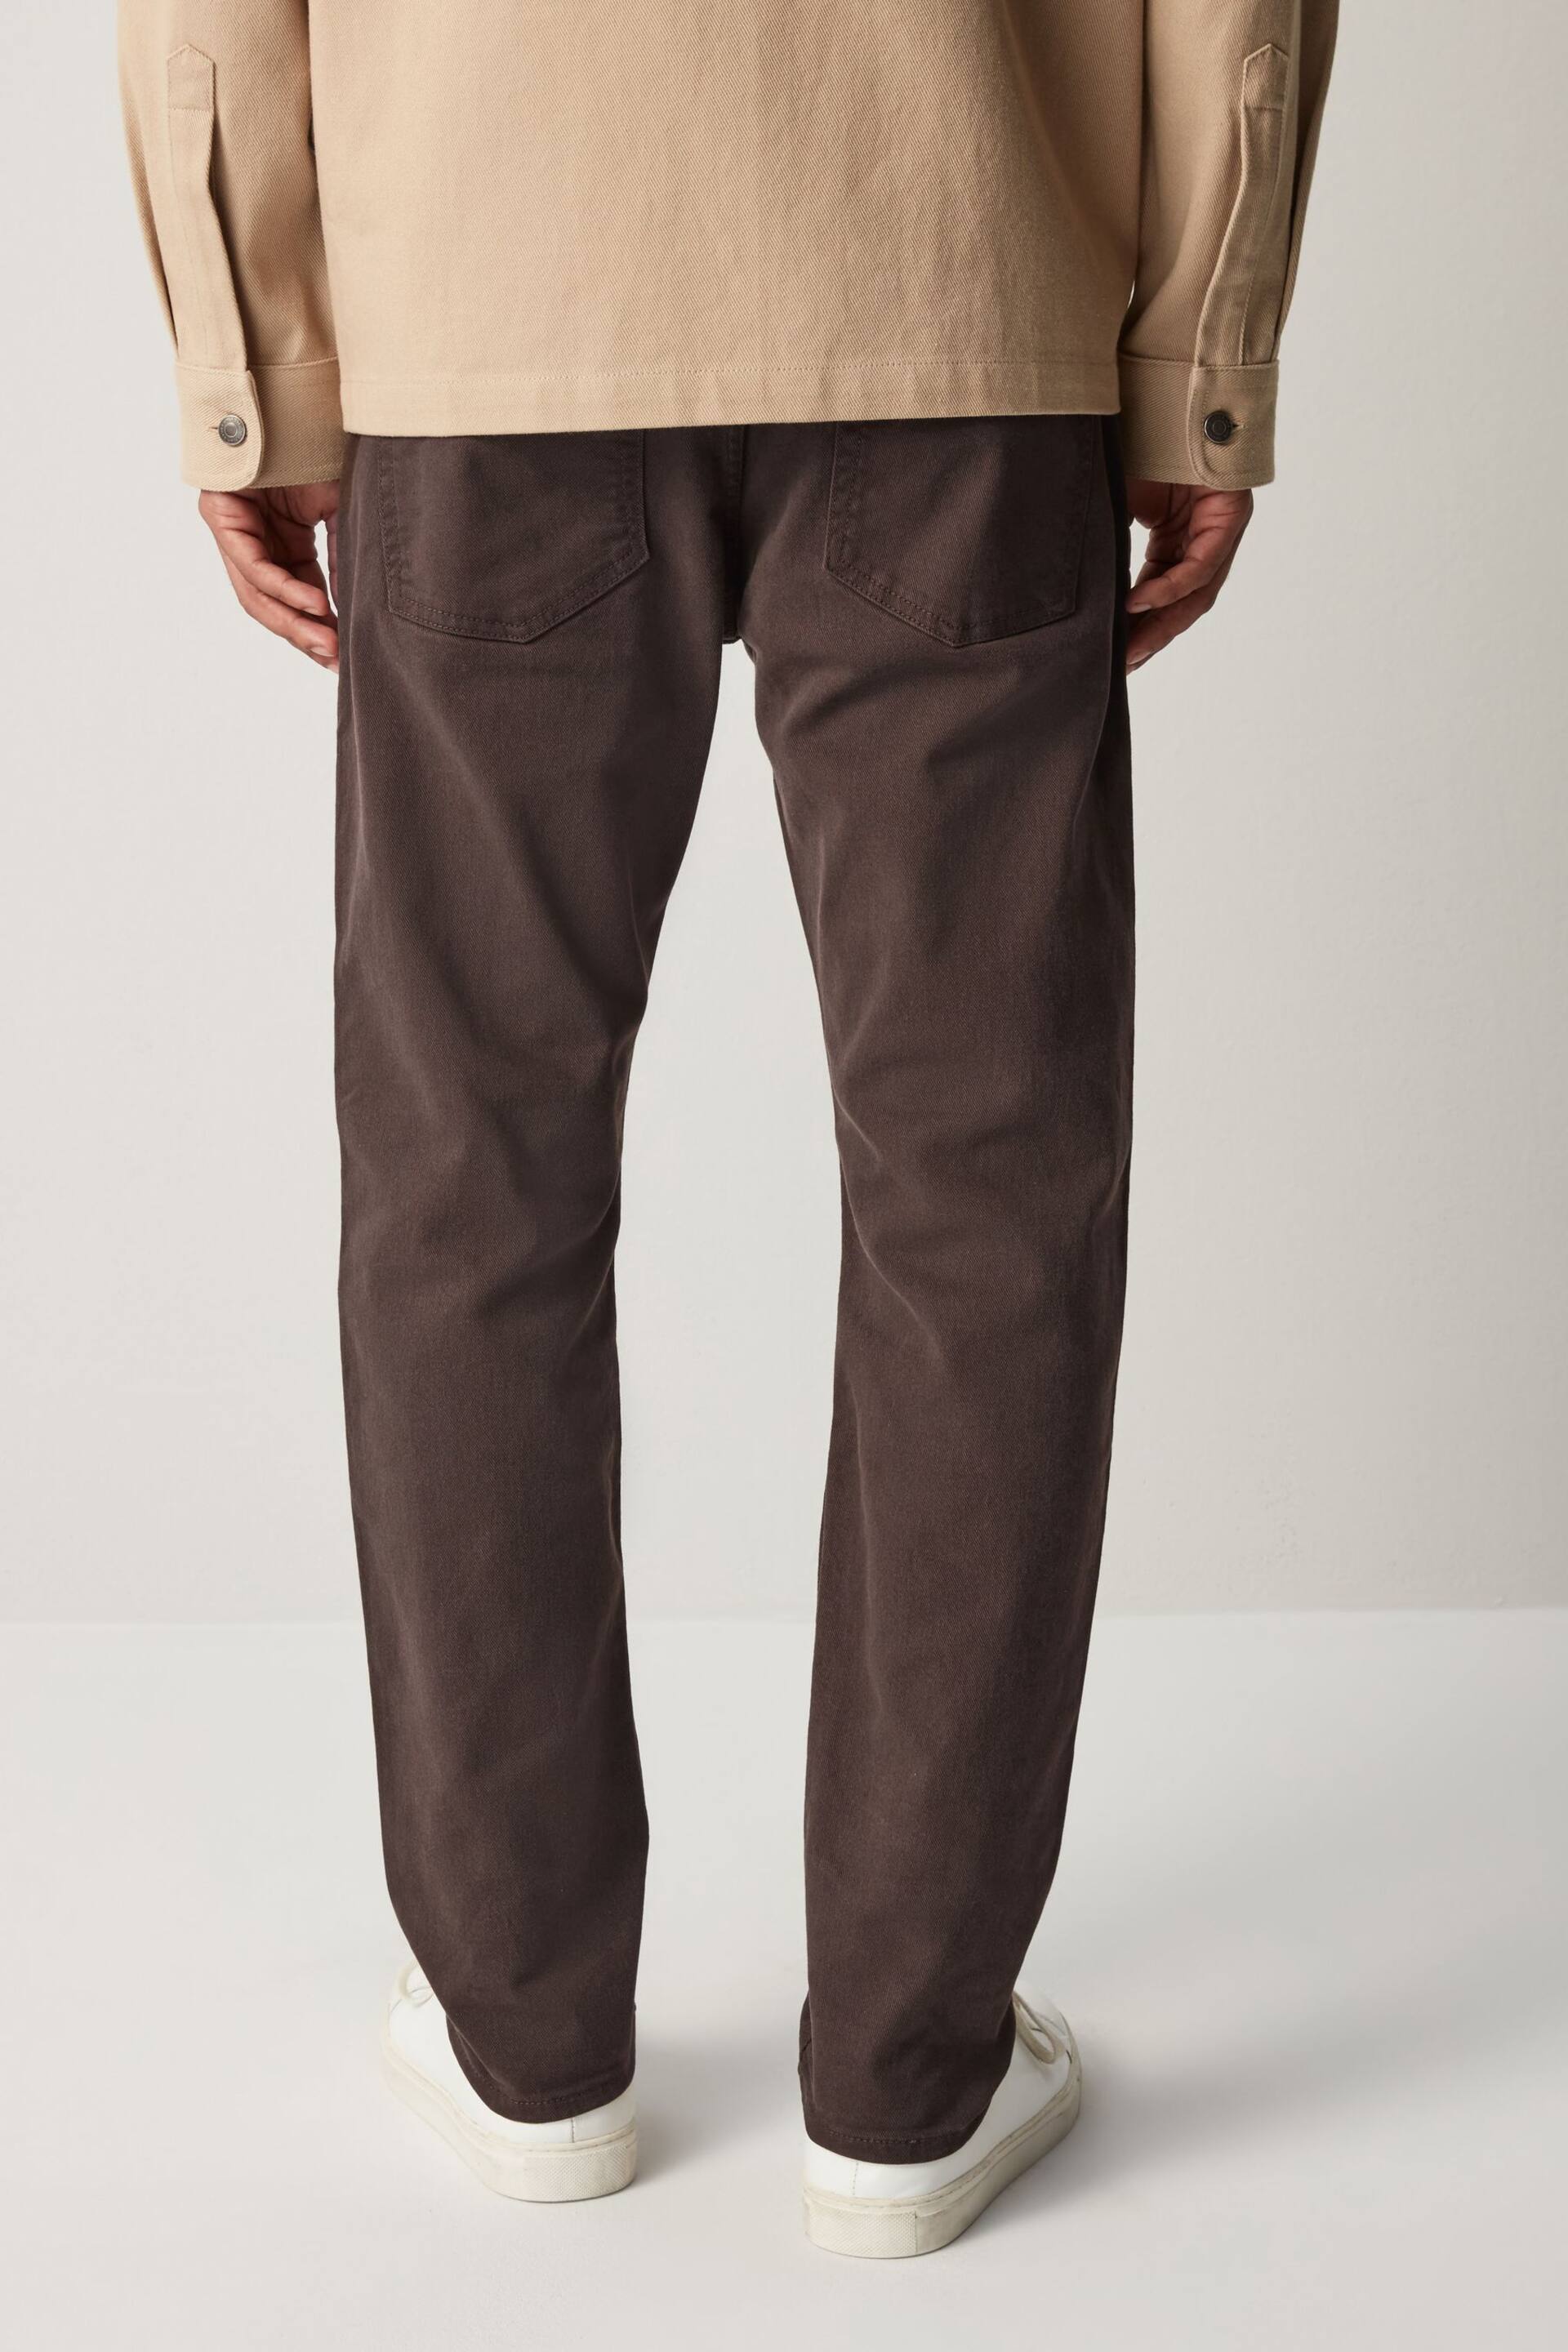 Brown Slim Fit Coloured Stretch Jeans - Image 4 of 7